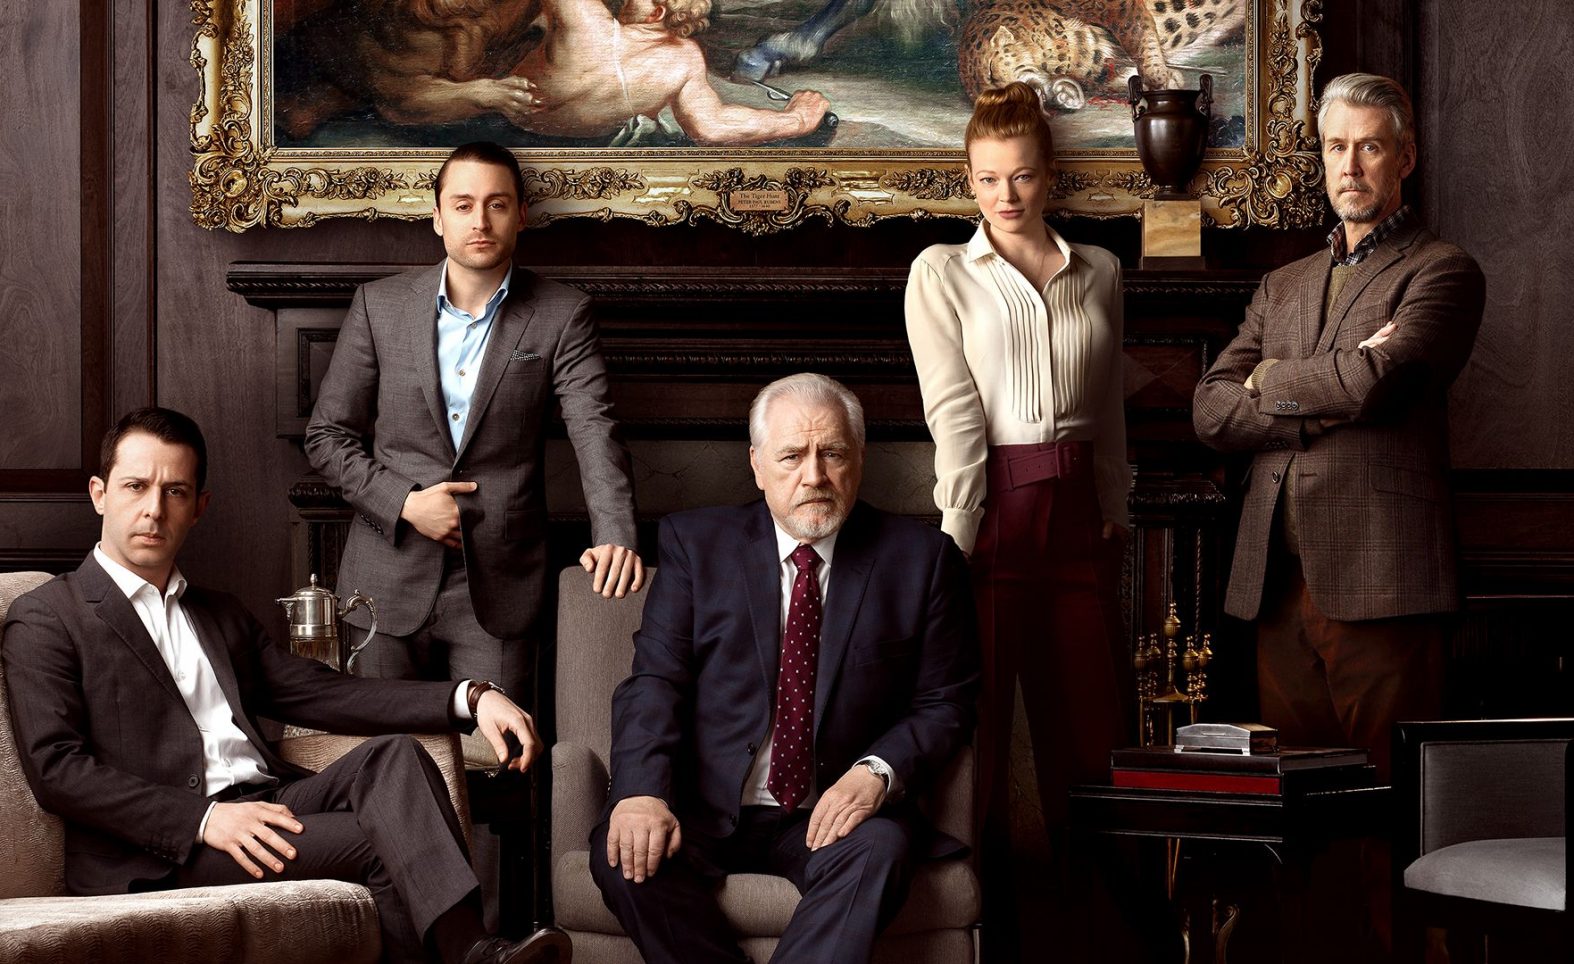 CW Pod: Brent Blum stops by to analyze the final episode of Succession